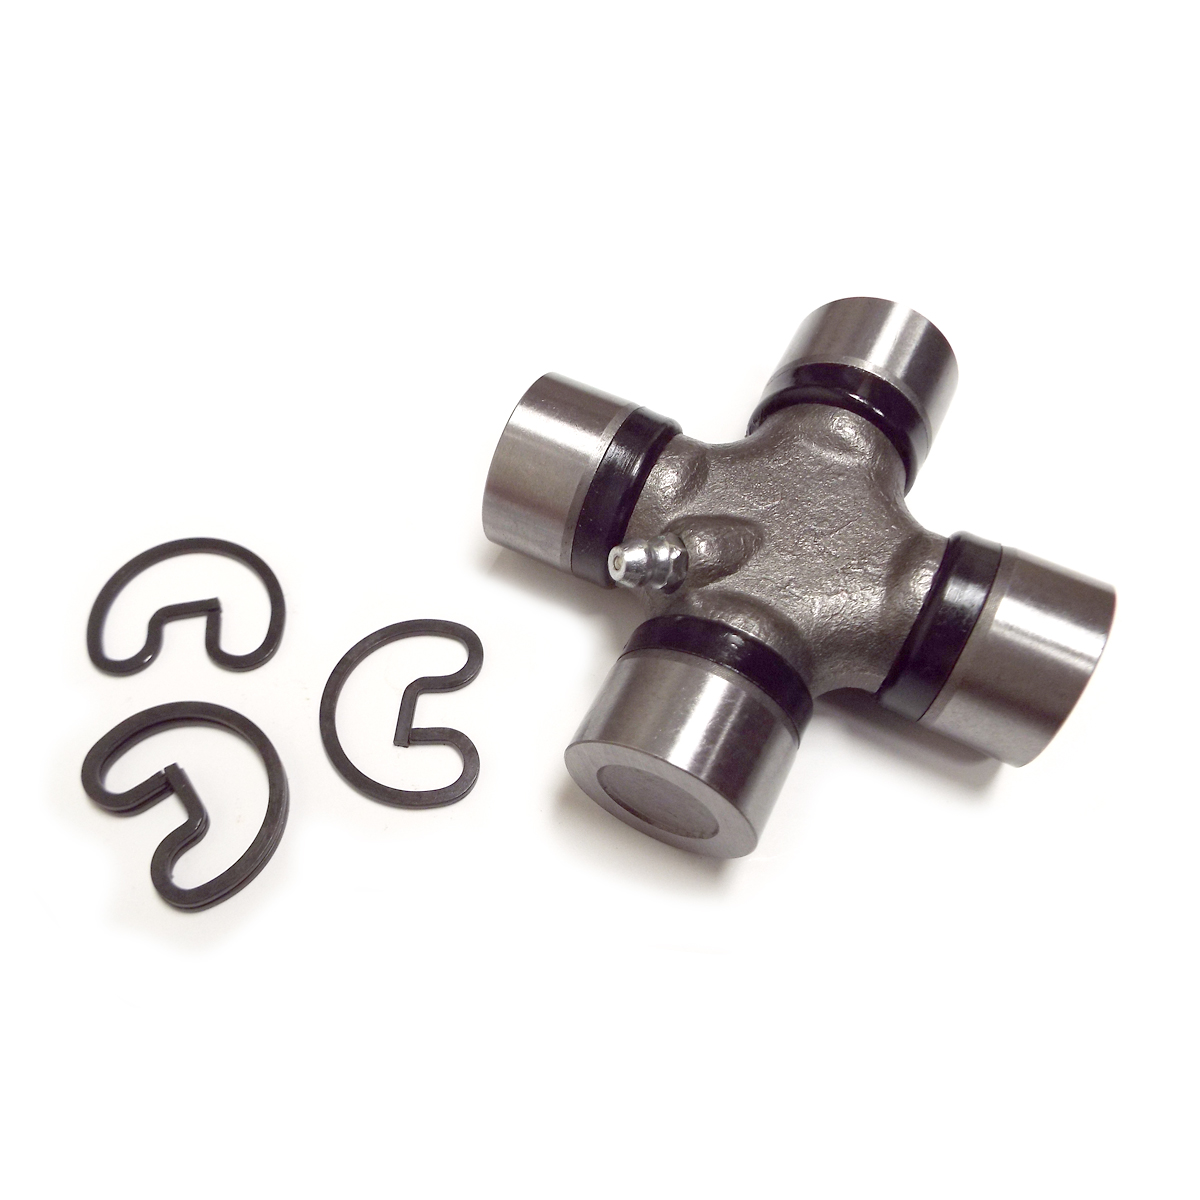 1955-1959 Universal Joint Complete 1/2 Ton 3-Speed Front 3 and 4-Speed Rear Chevrolet and GMC Pickup Truck